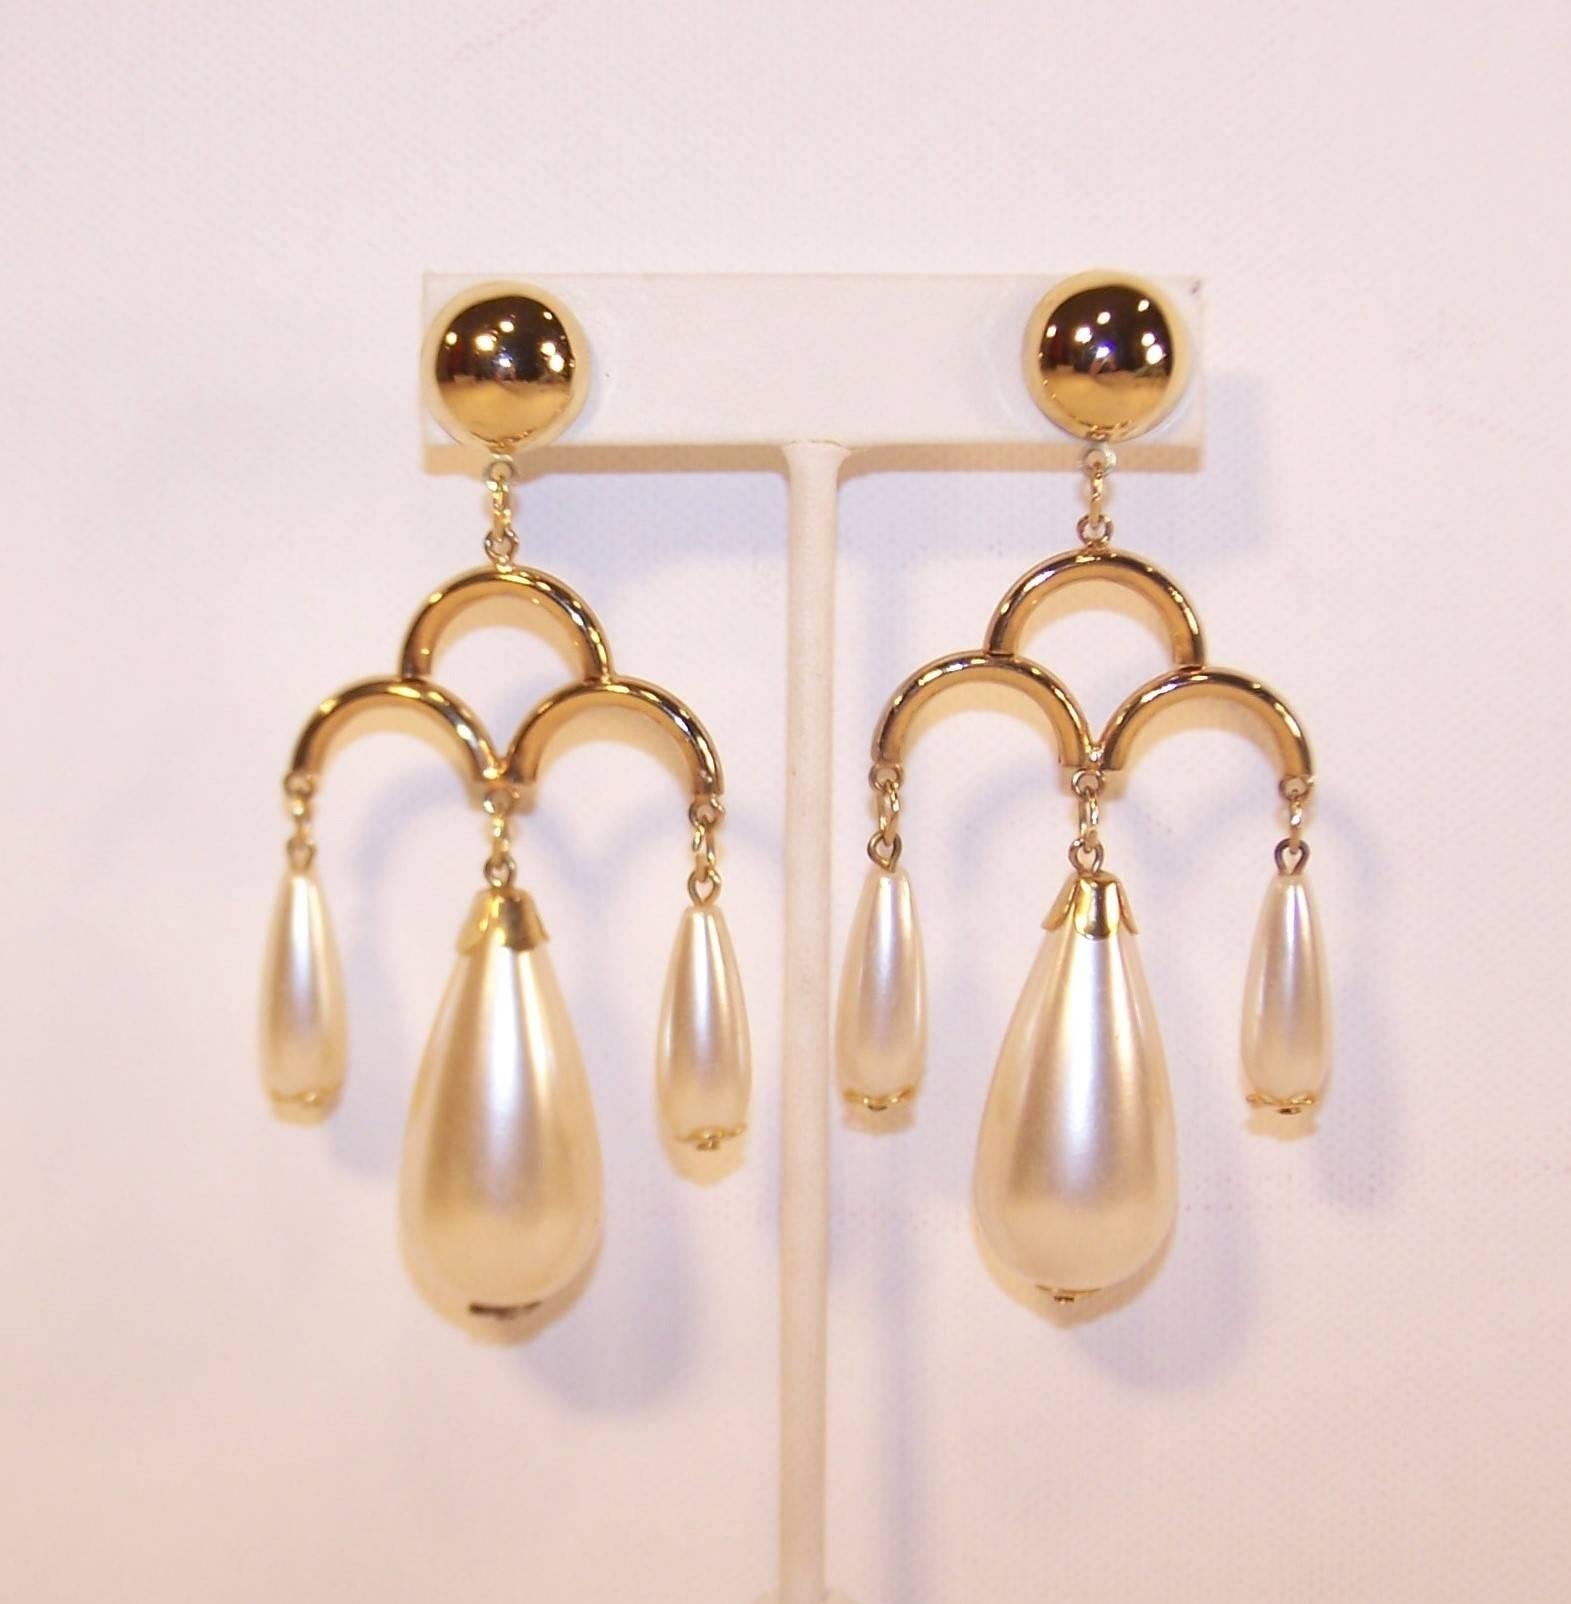 Wowza!  These 1970's earrings offer the best of both worlds...large and comfortable!  Though they are sizable and appear weighty, the tubular gold tone metal components ensure ease of wear.  The half sphere bases have pierced backings and suspend